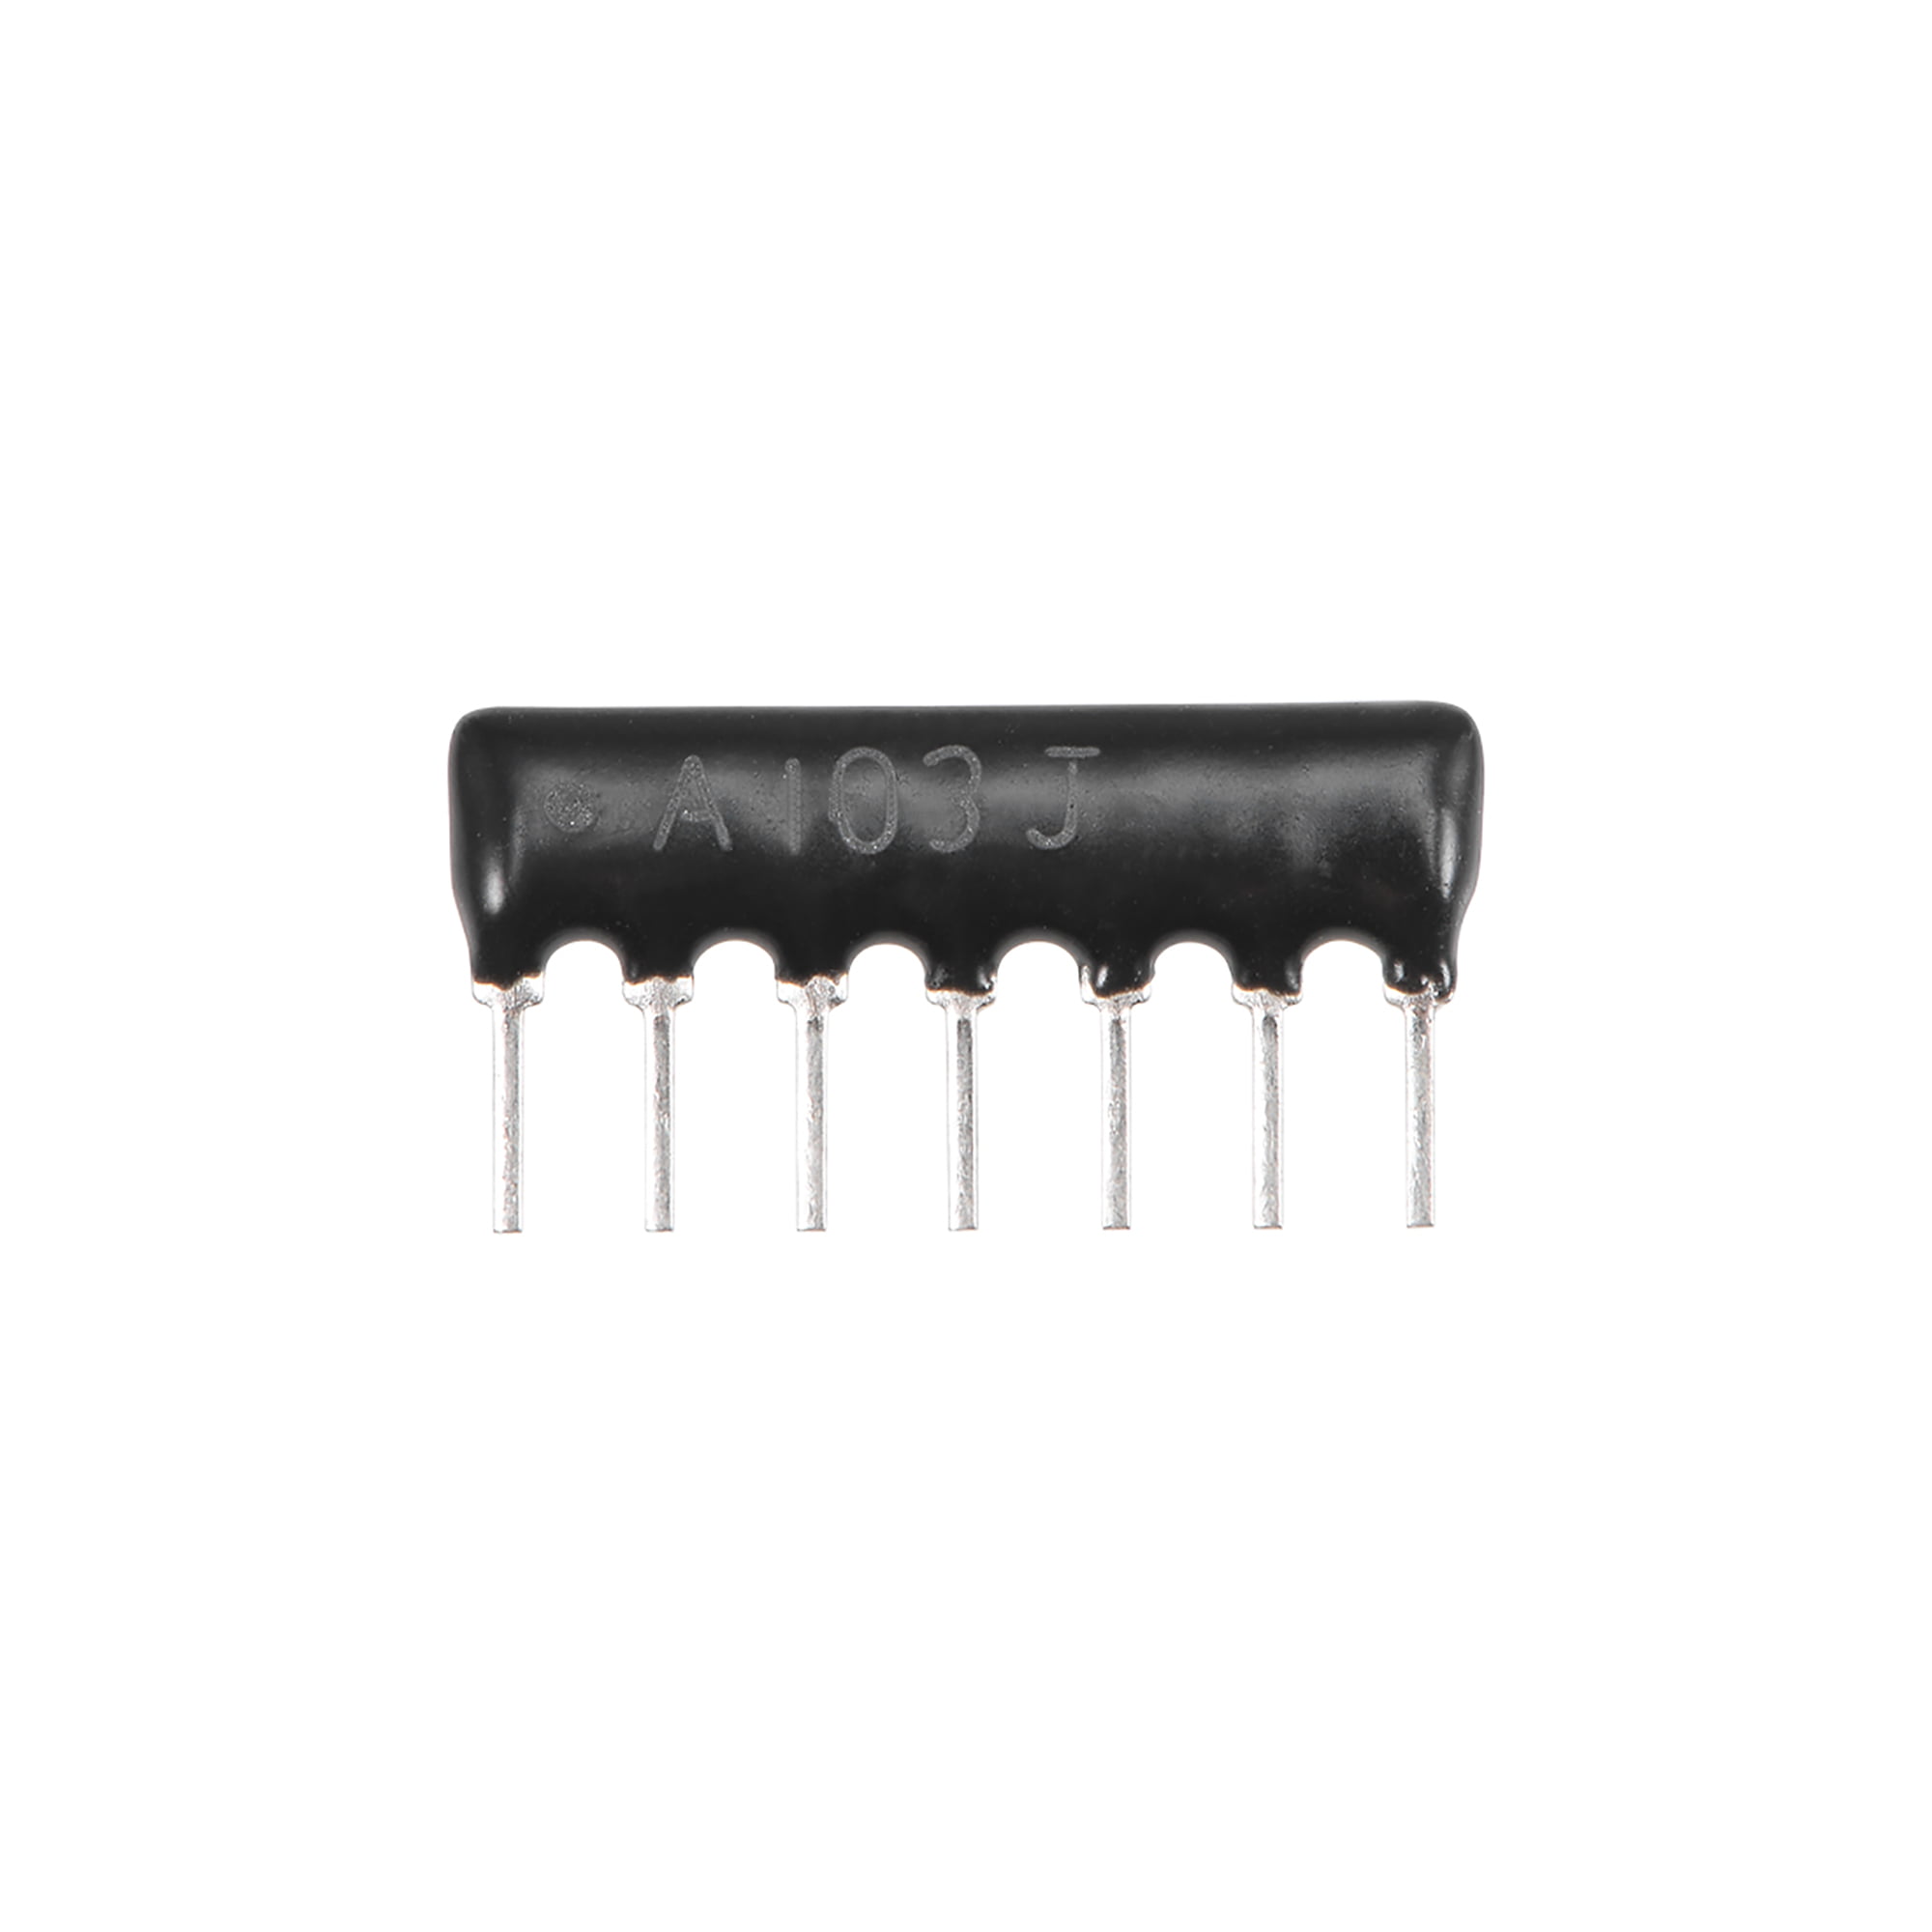 AORN2001AT5 Pack of 10 RES NETWORK 4 RES 2K OHM 8SOIC 